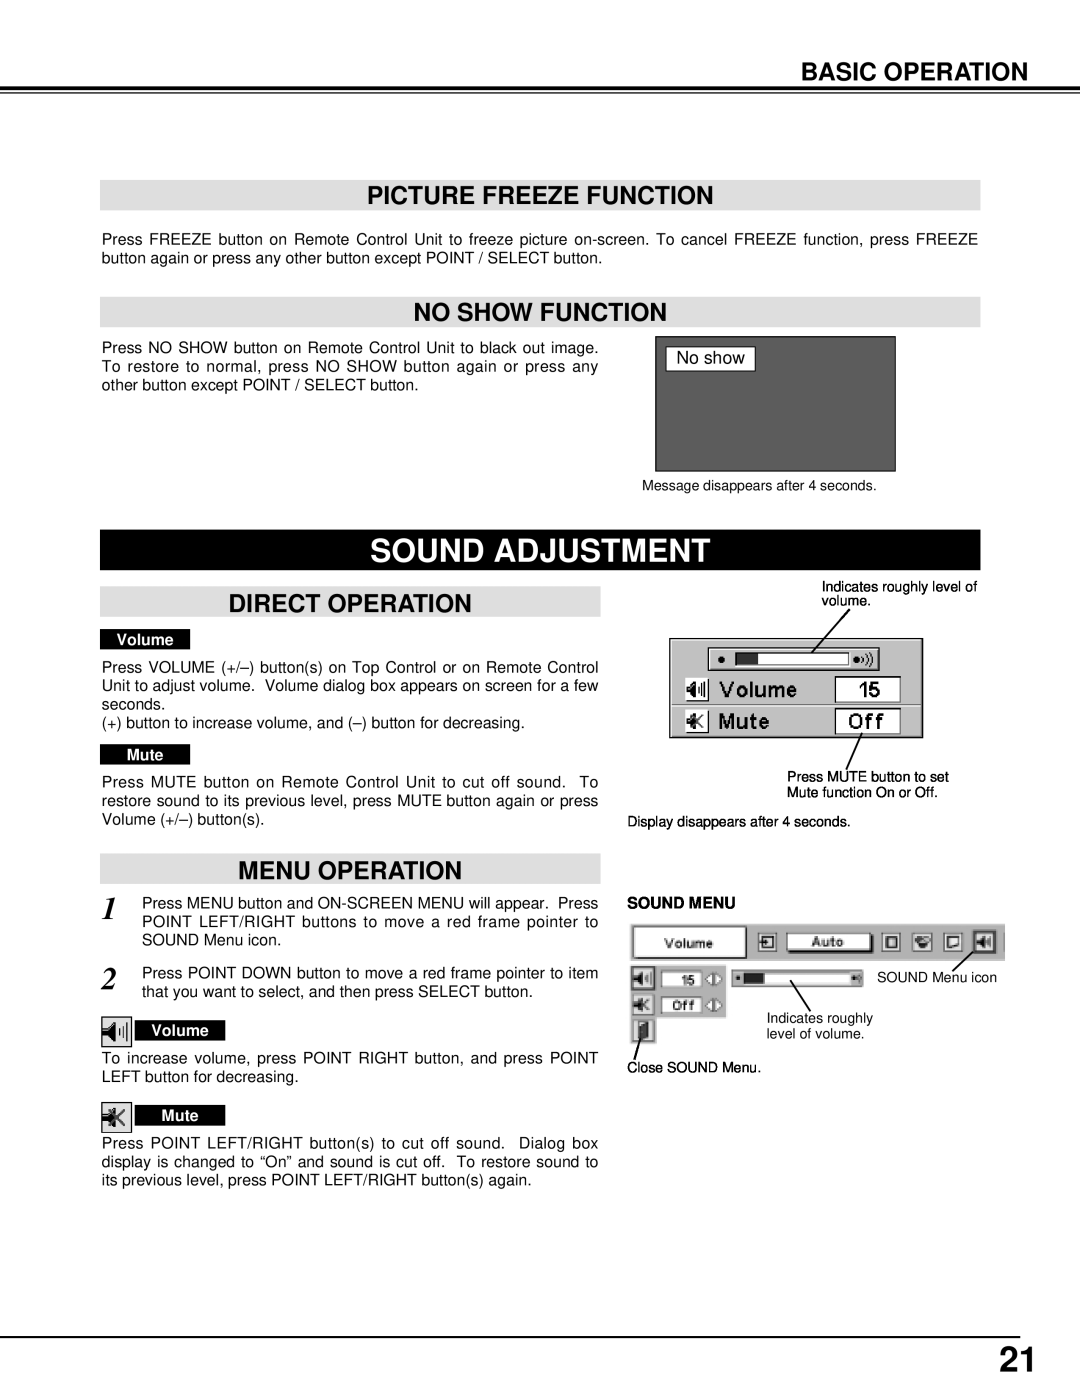 Sanyo PLV-70 Sound Adjustment, Basic Operation Picture Freeze Function, No Show Function, Direct Operation, Menu Operation 